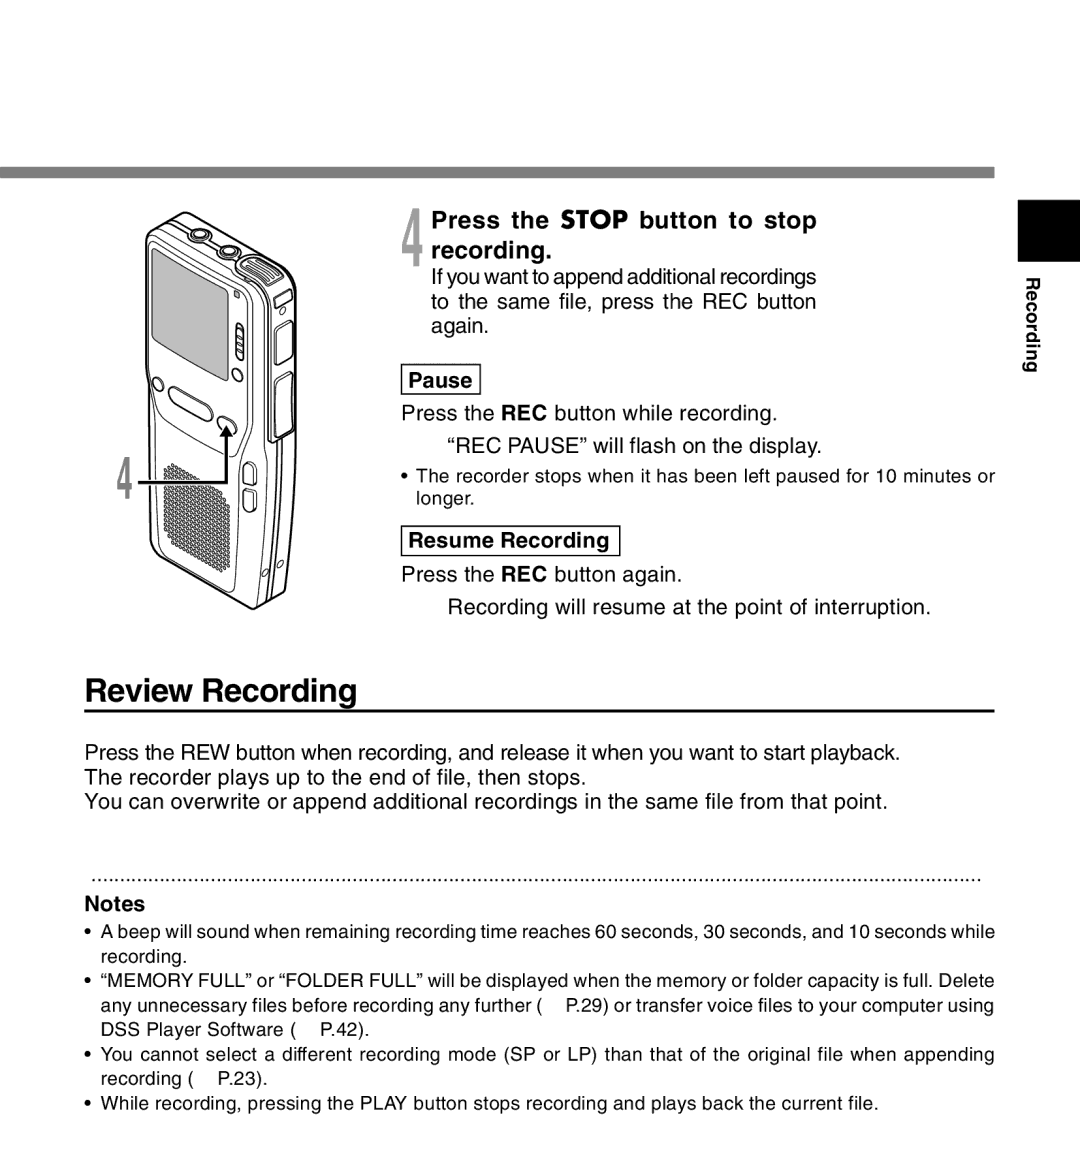 Olympus DS-2300 manual Review Recording, 4Press the Stop button to stop recording, Pause, Resume Recording 